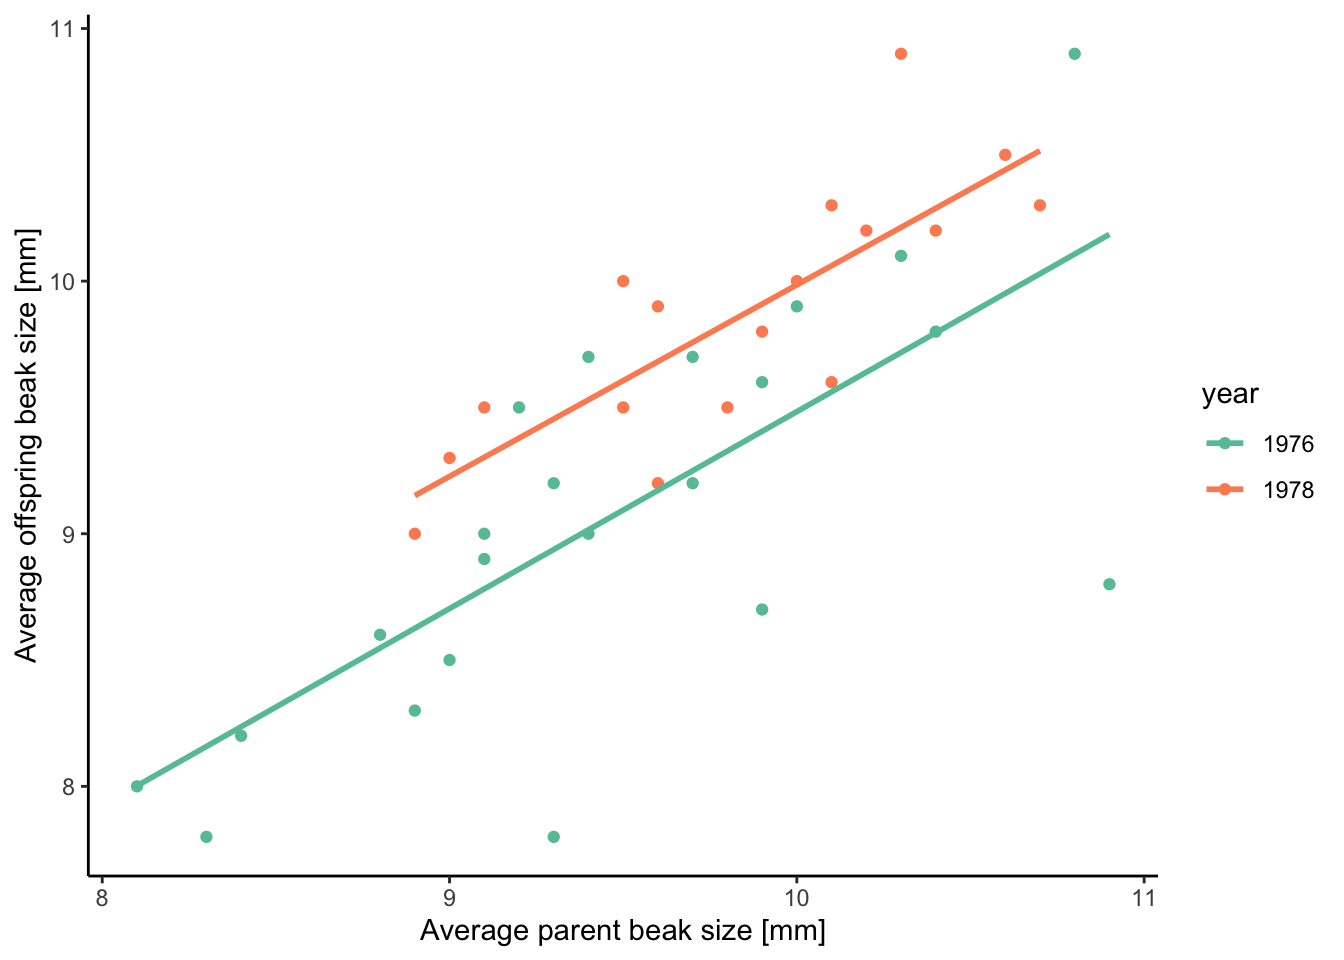 Scatter plot showing the relationship between the beak size of the parents (average between mother and father) and their offspring (average across multiple siblings) measured separately in 1976 and 1978. [Data](data/3_parent_offspring.csv) from Boag (1983).